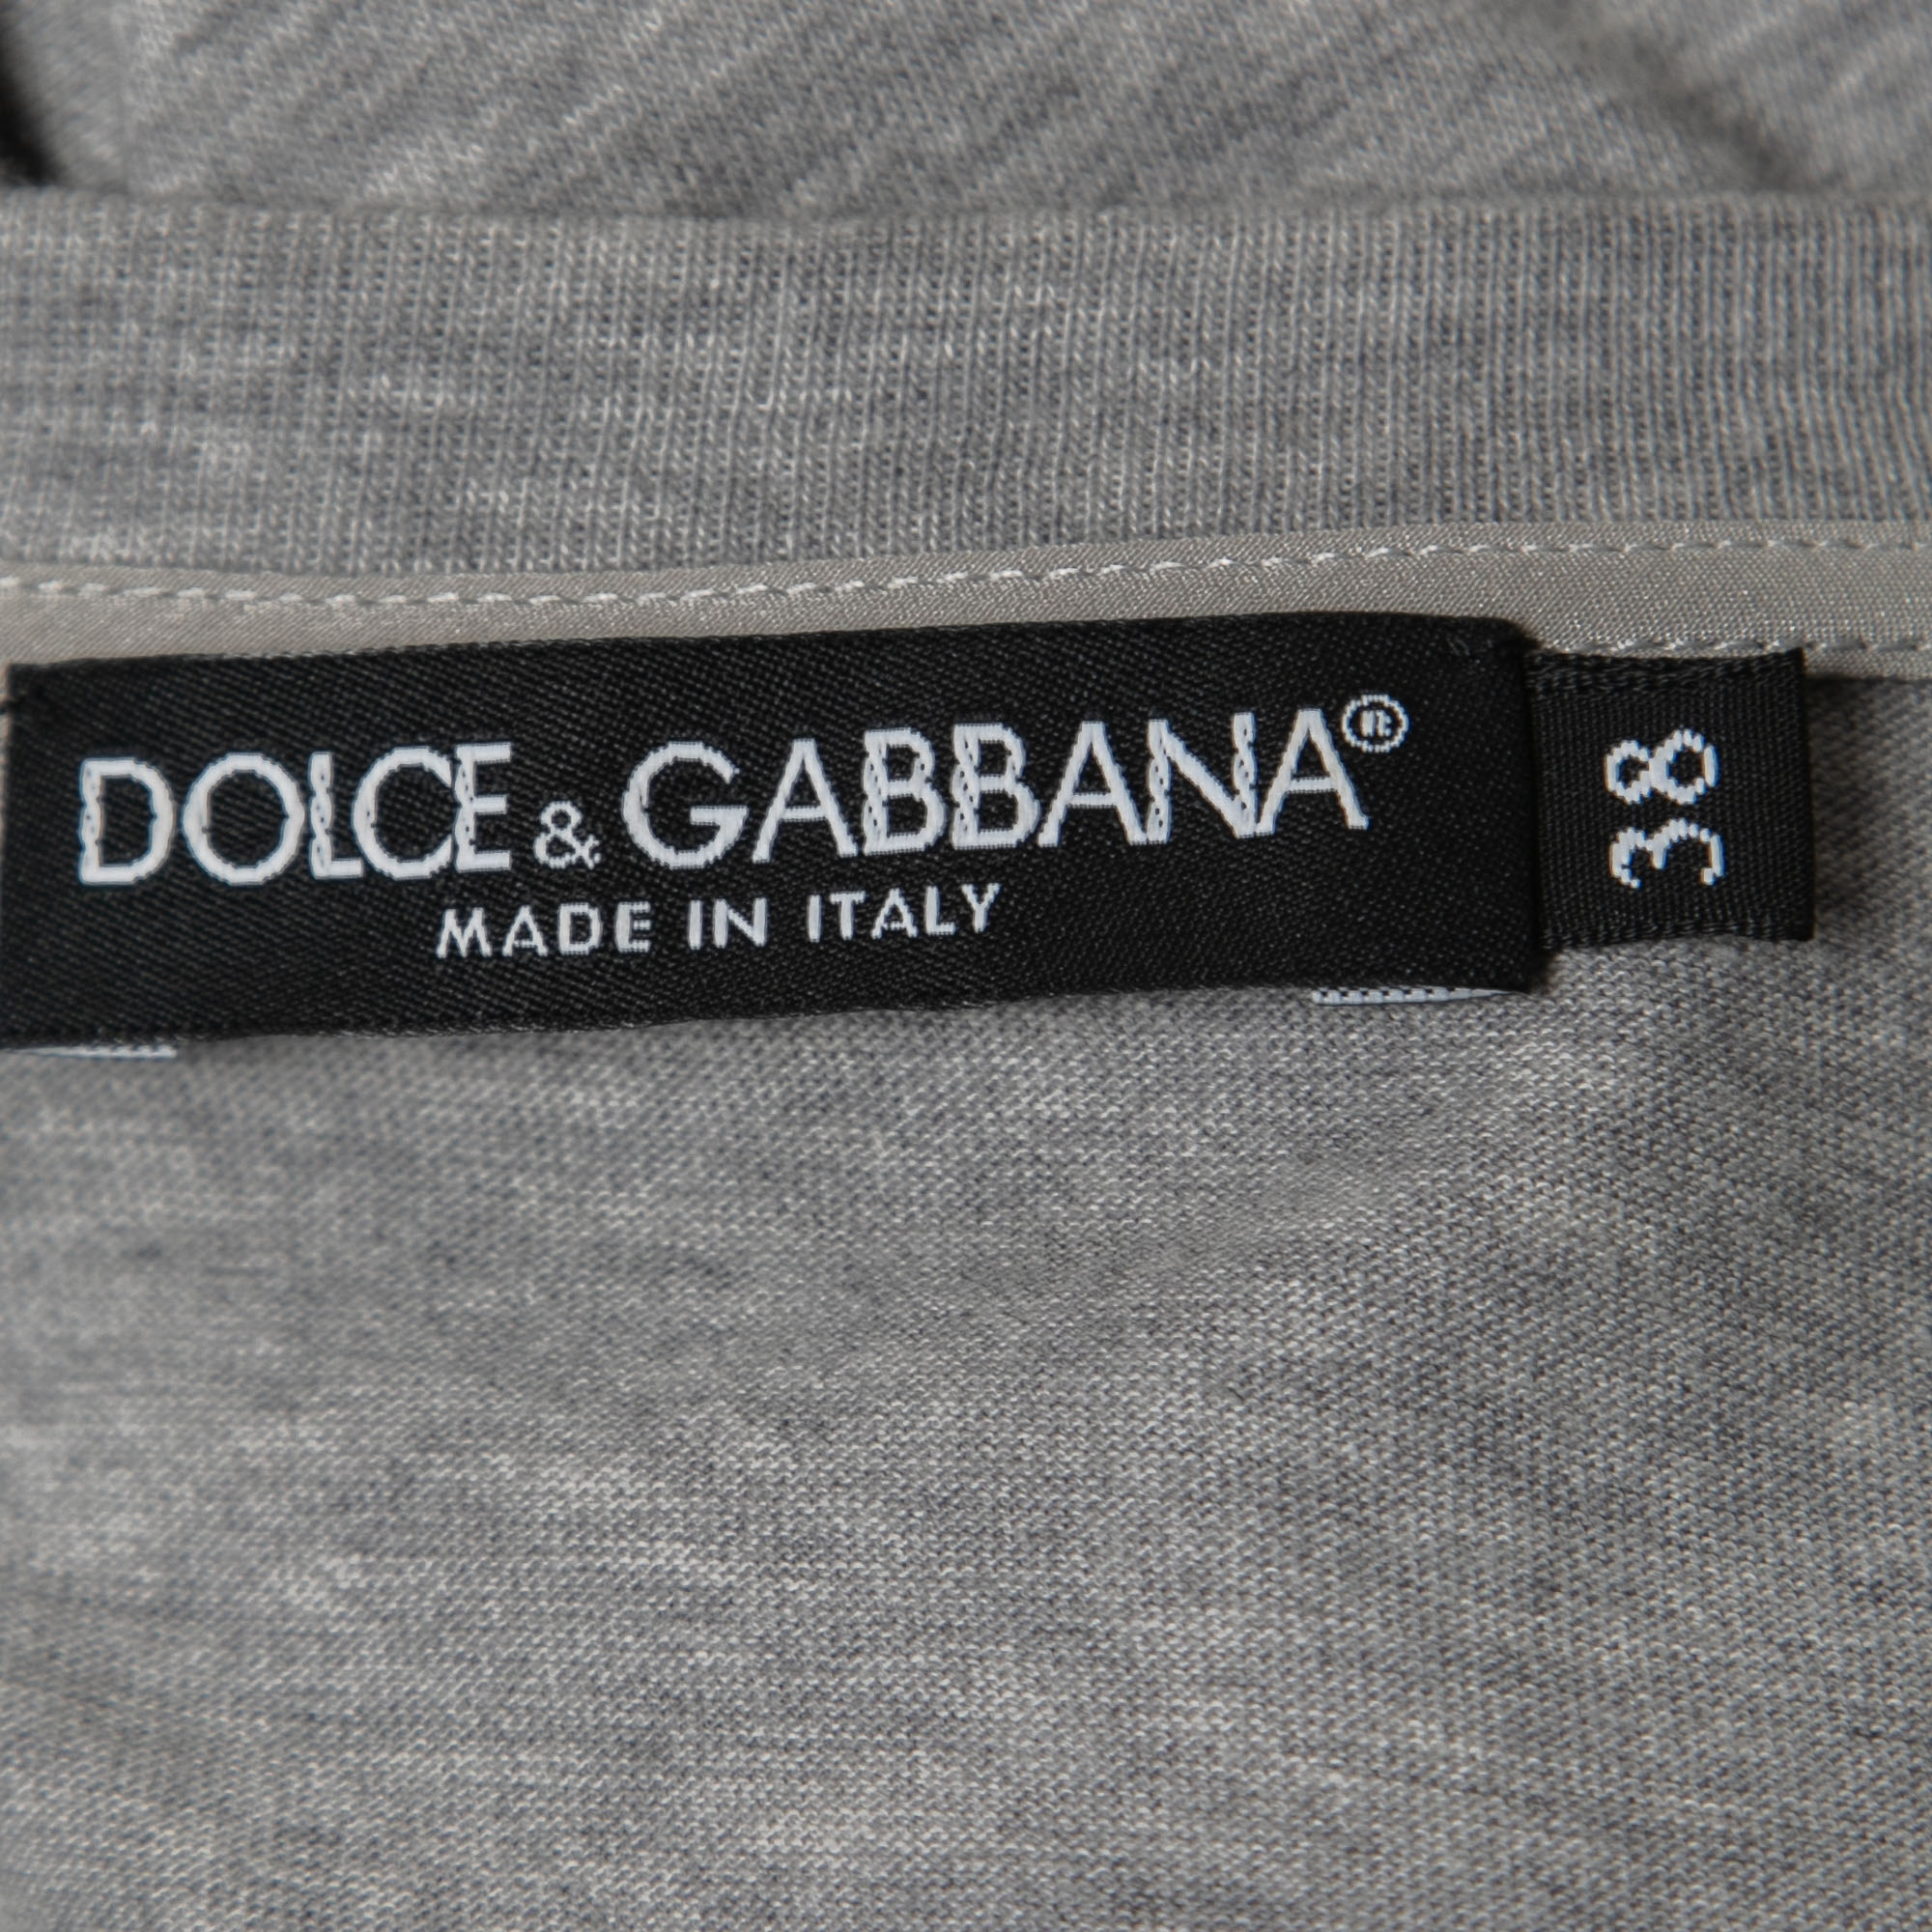 Dolce & Gabbana Grey Cotton LOVE Lace Patterned Tank Top S